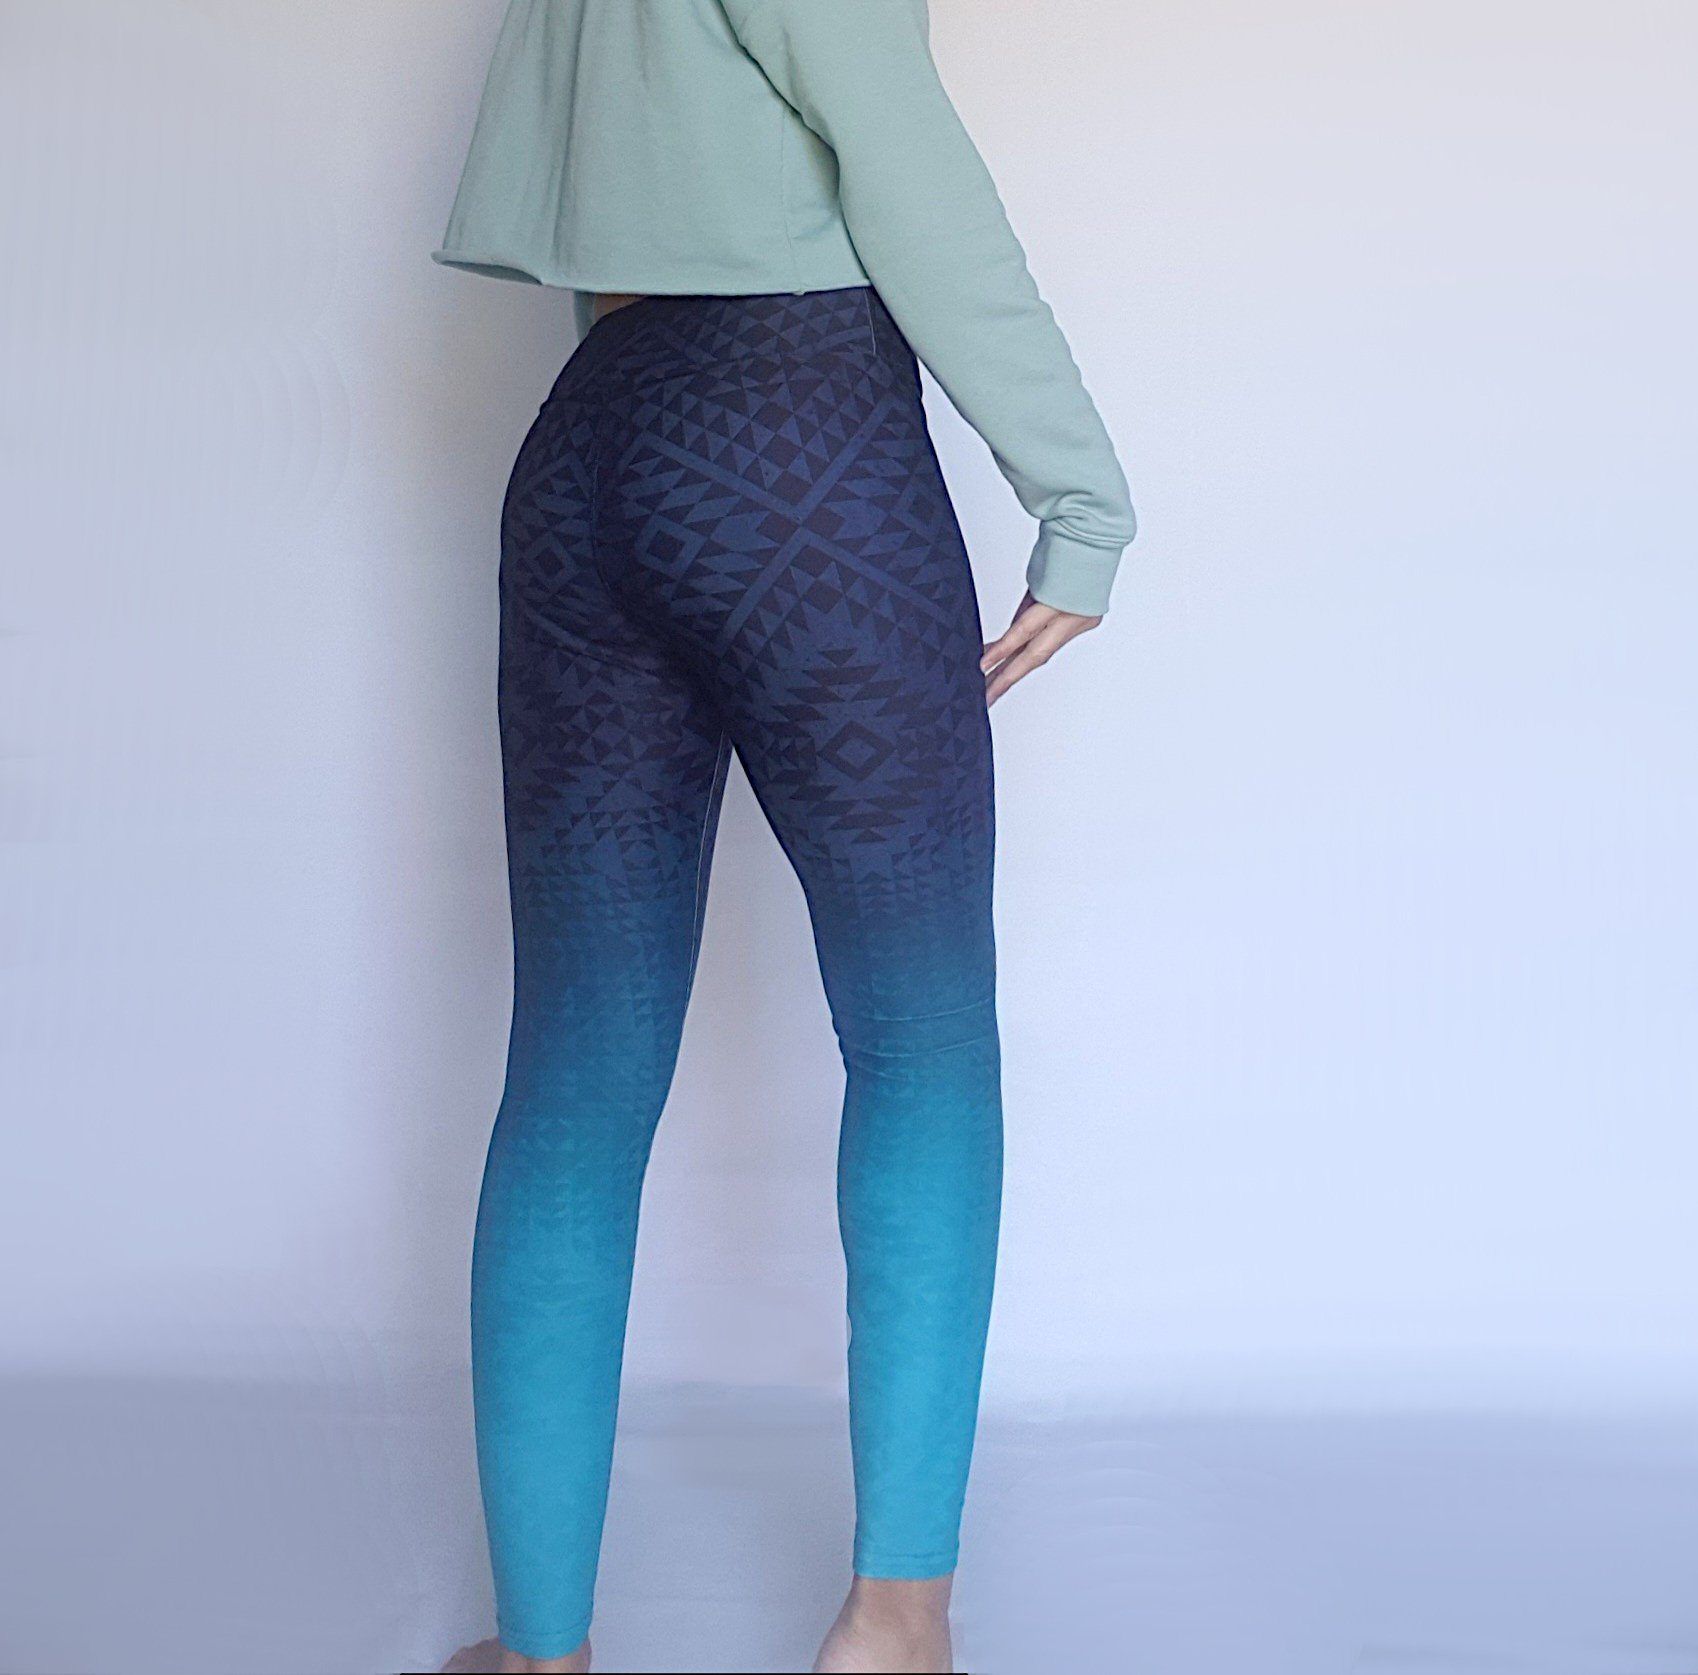 Blue and Purple, Yoga Leggings, Womens Pants, High Waisted, Big Waistband,  Tie Dye, Ombre by Ombeautiful -  Canada